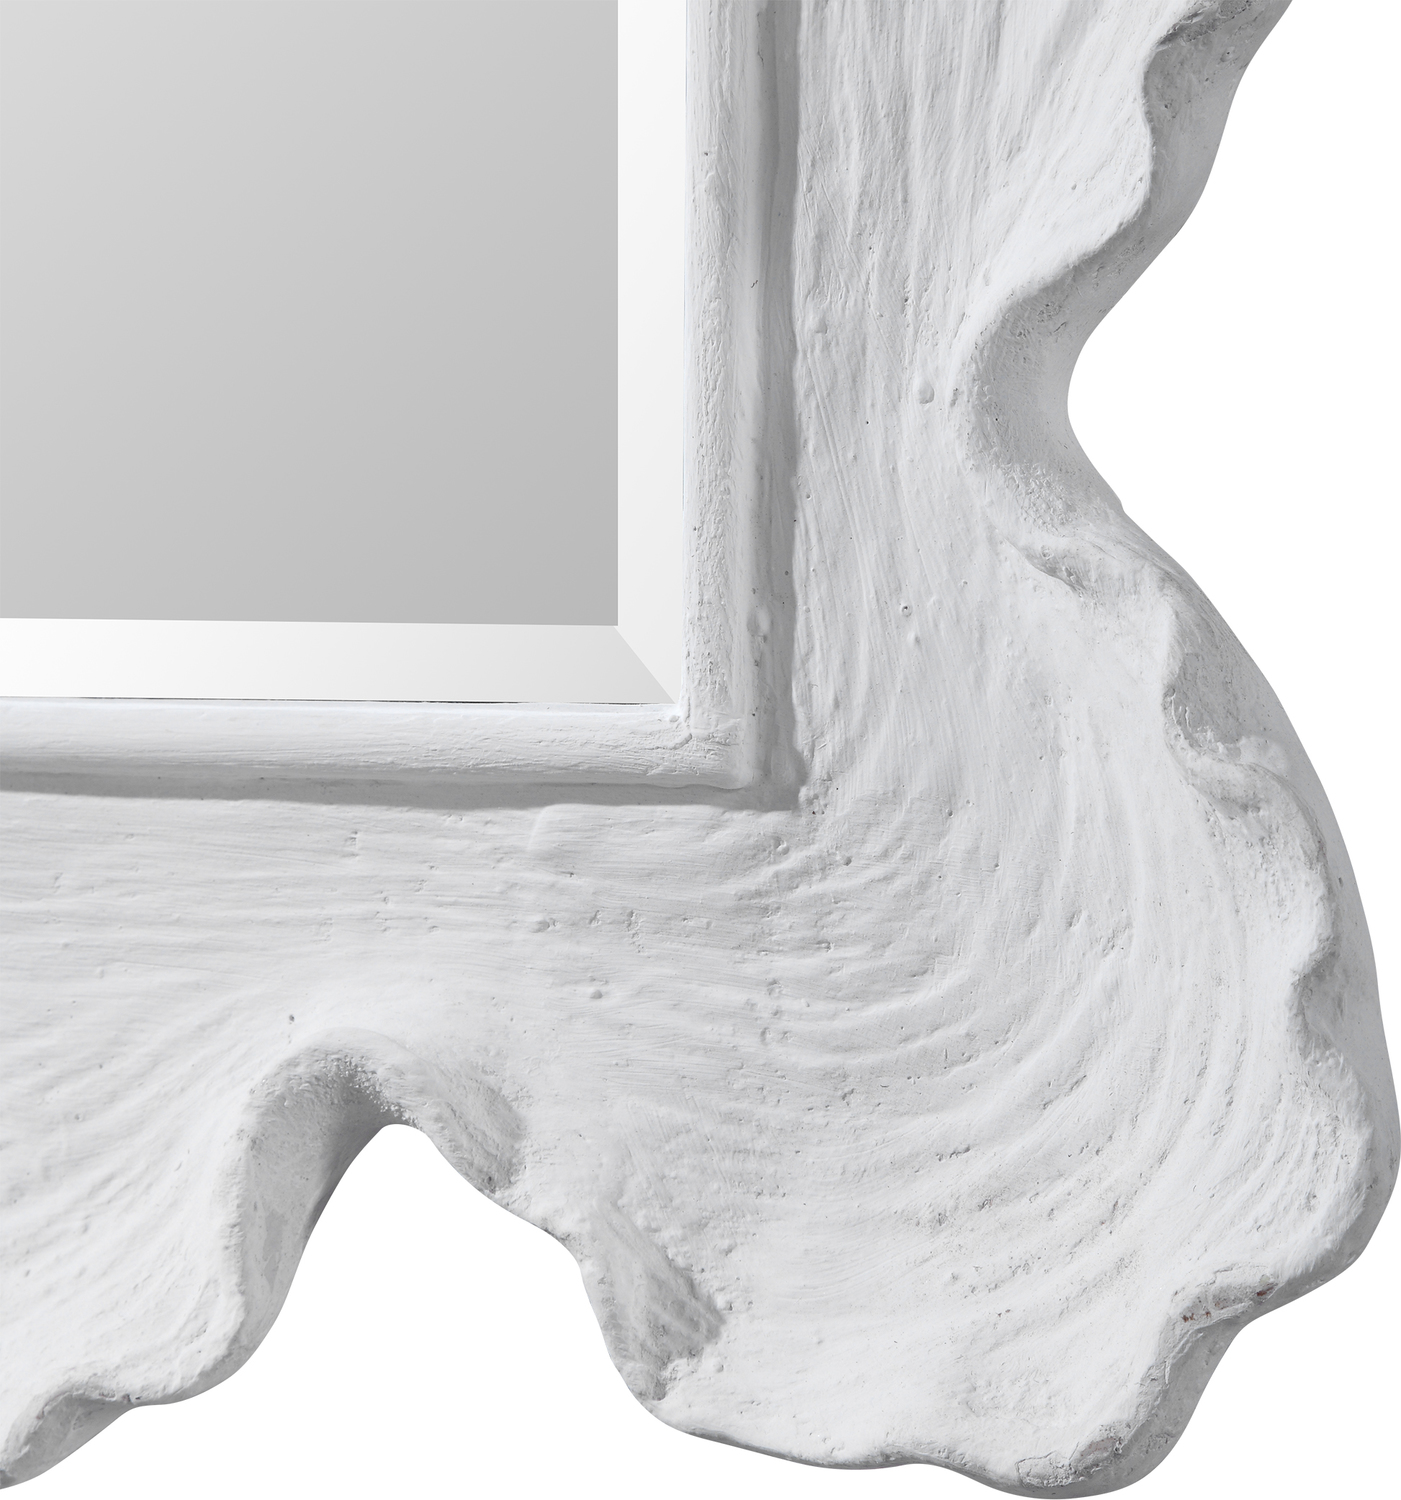 modern mirror design for bathroom Uttermost Coastal Mirror Reminiscent Of White Coral, This Mirror Showcases A Contemporary Coastal Design. The Organic Shaped Frame Is Finished In Matte White With Noticeable Waves And Texture. May Be Hung Horizontal Or Vertical.